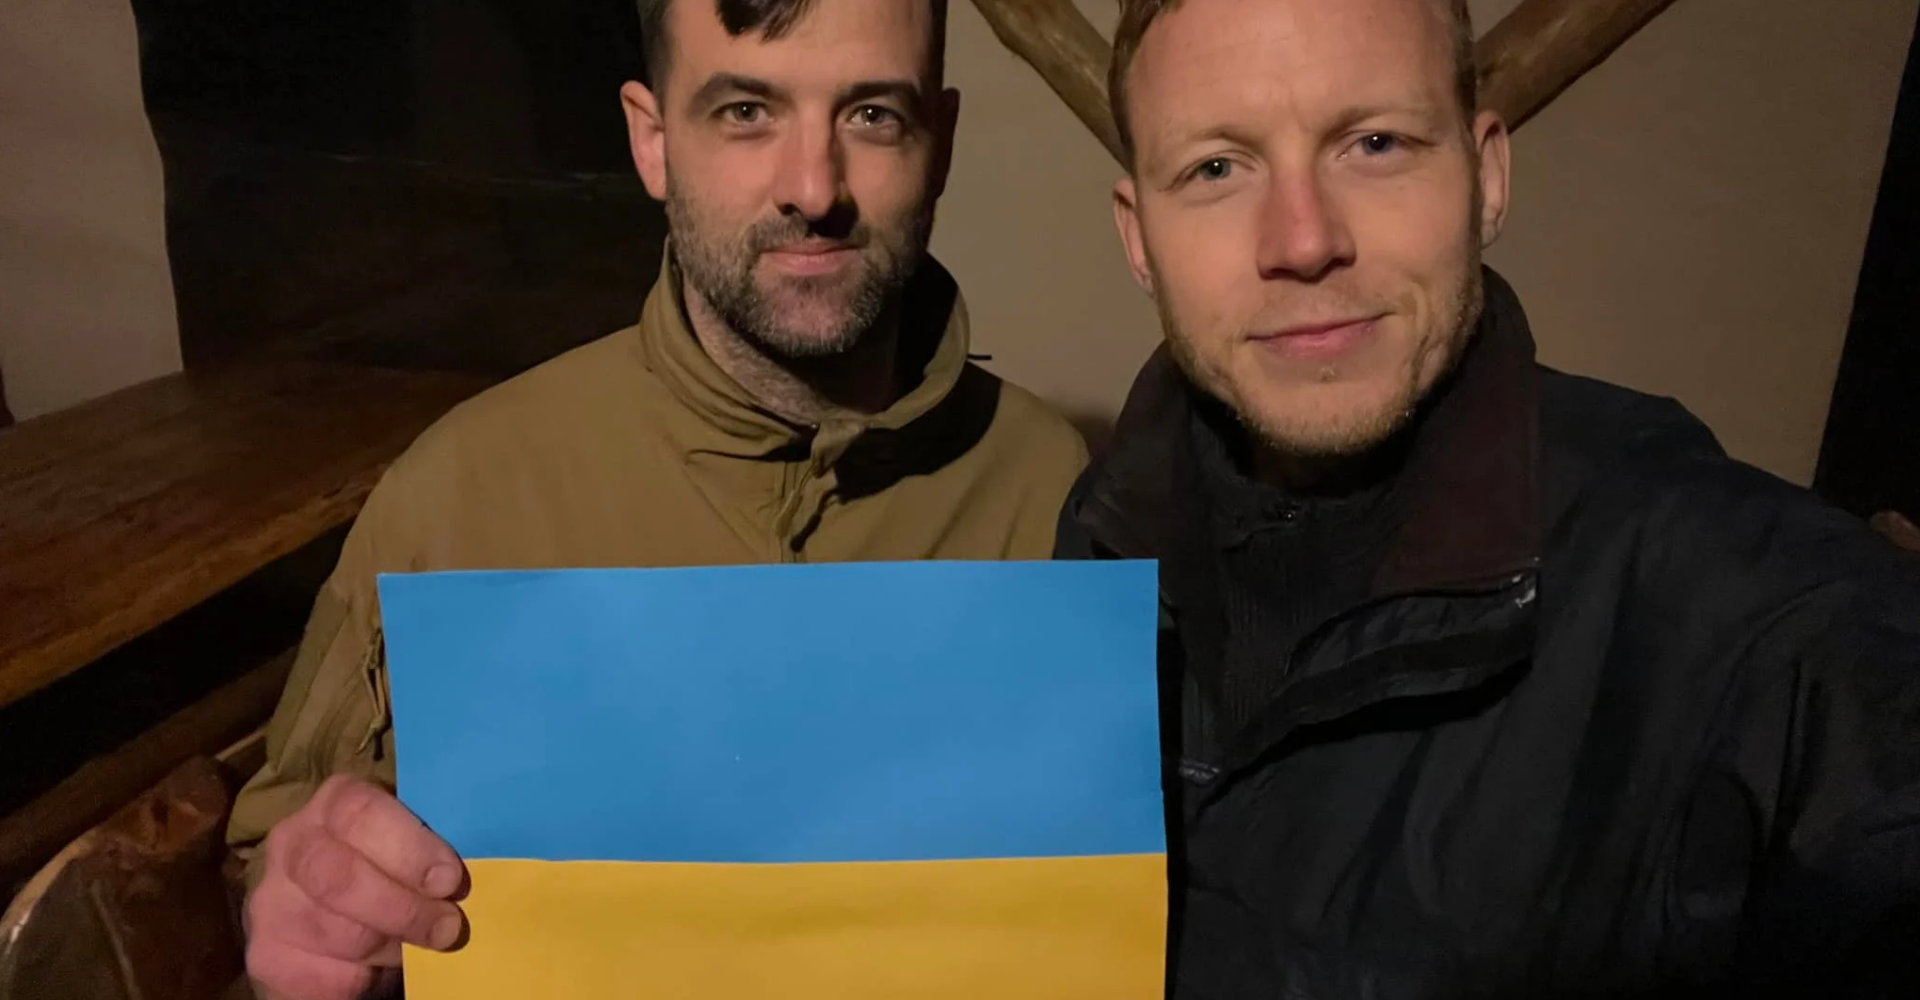 A Somerset restaurant owner’s journey to deliver aid in Ukraine